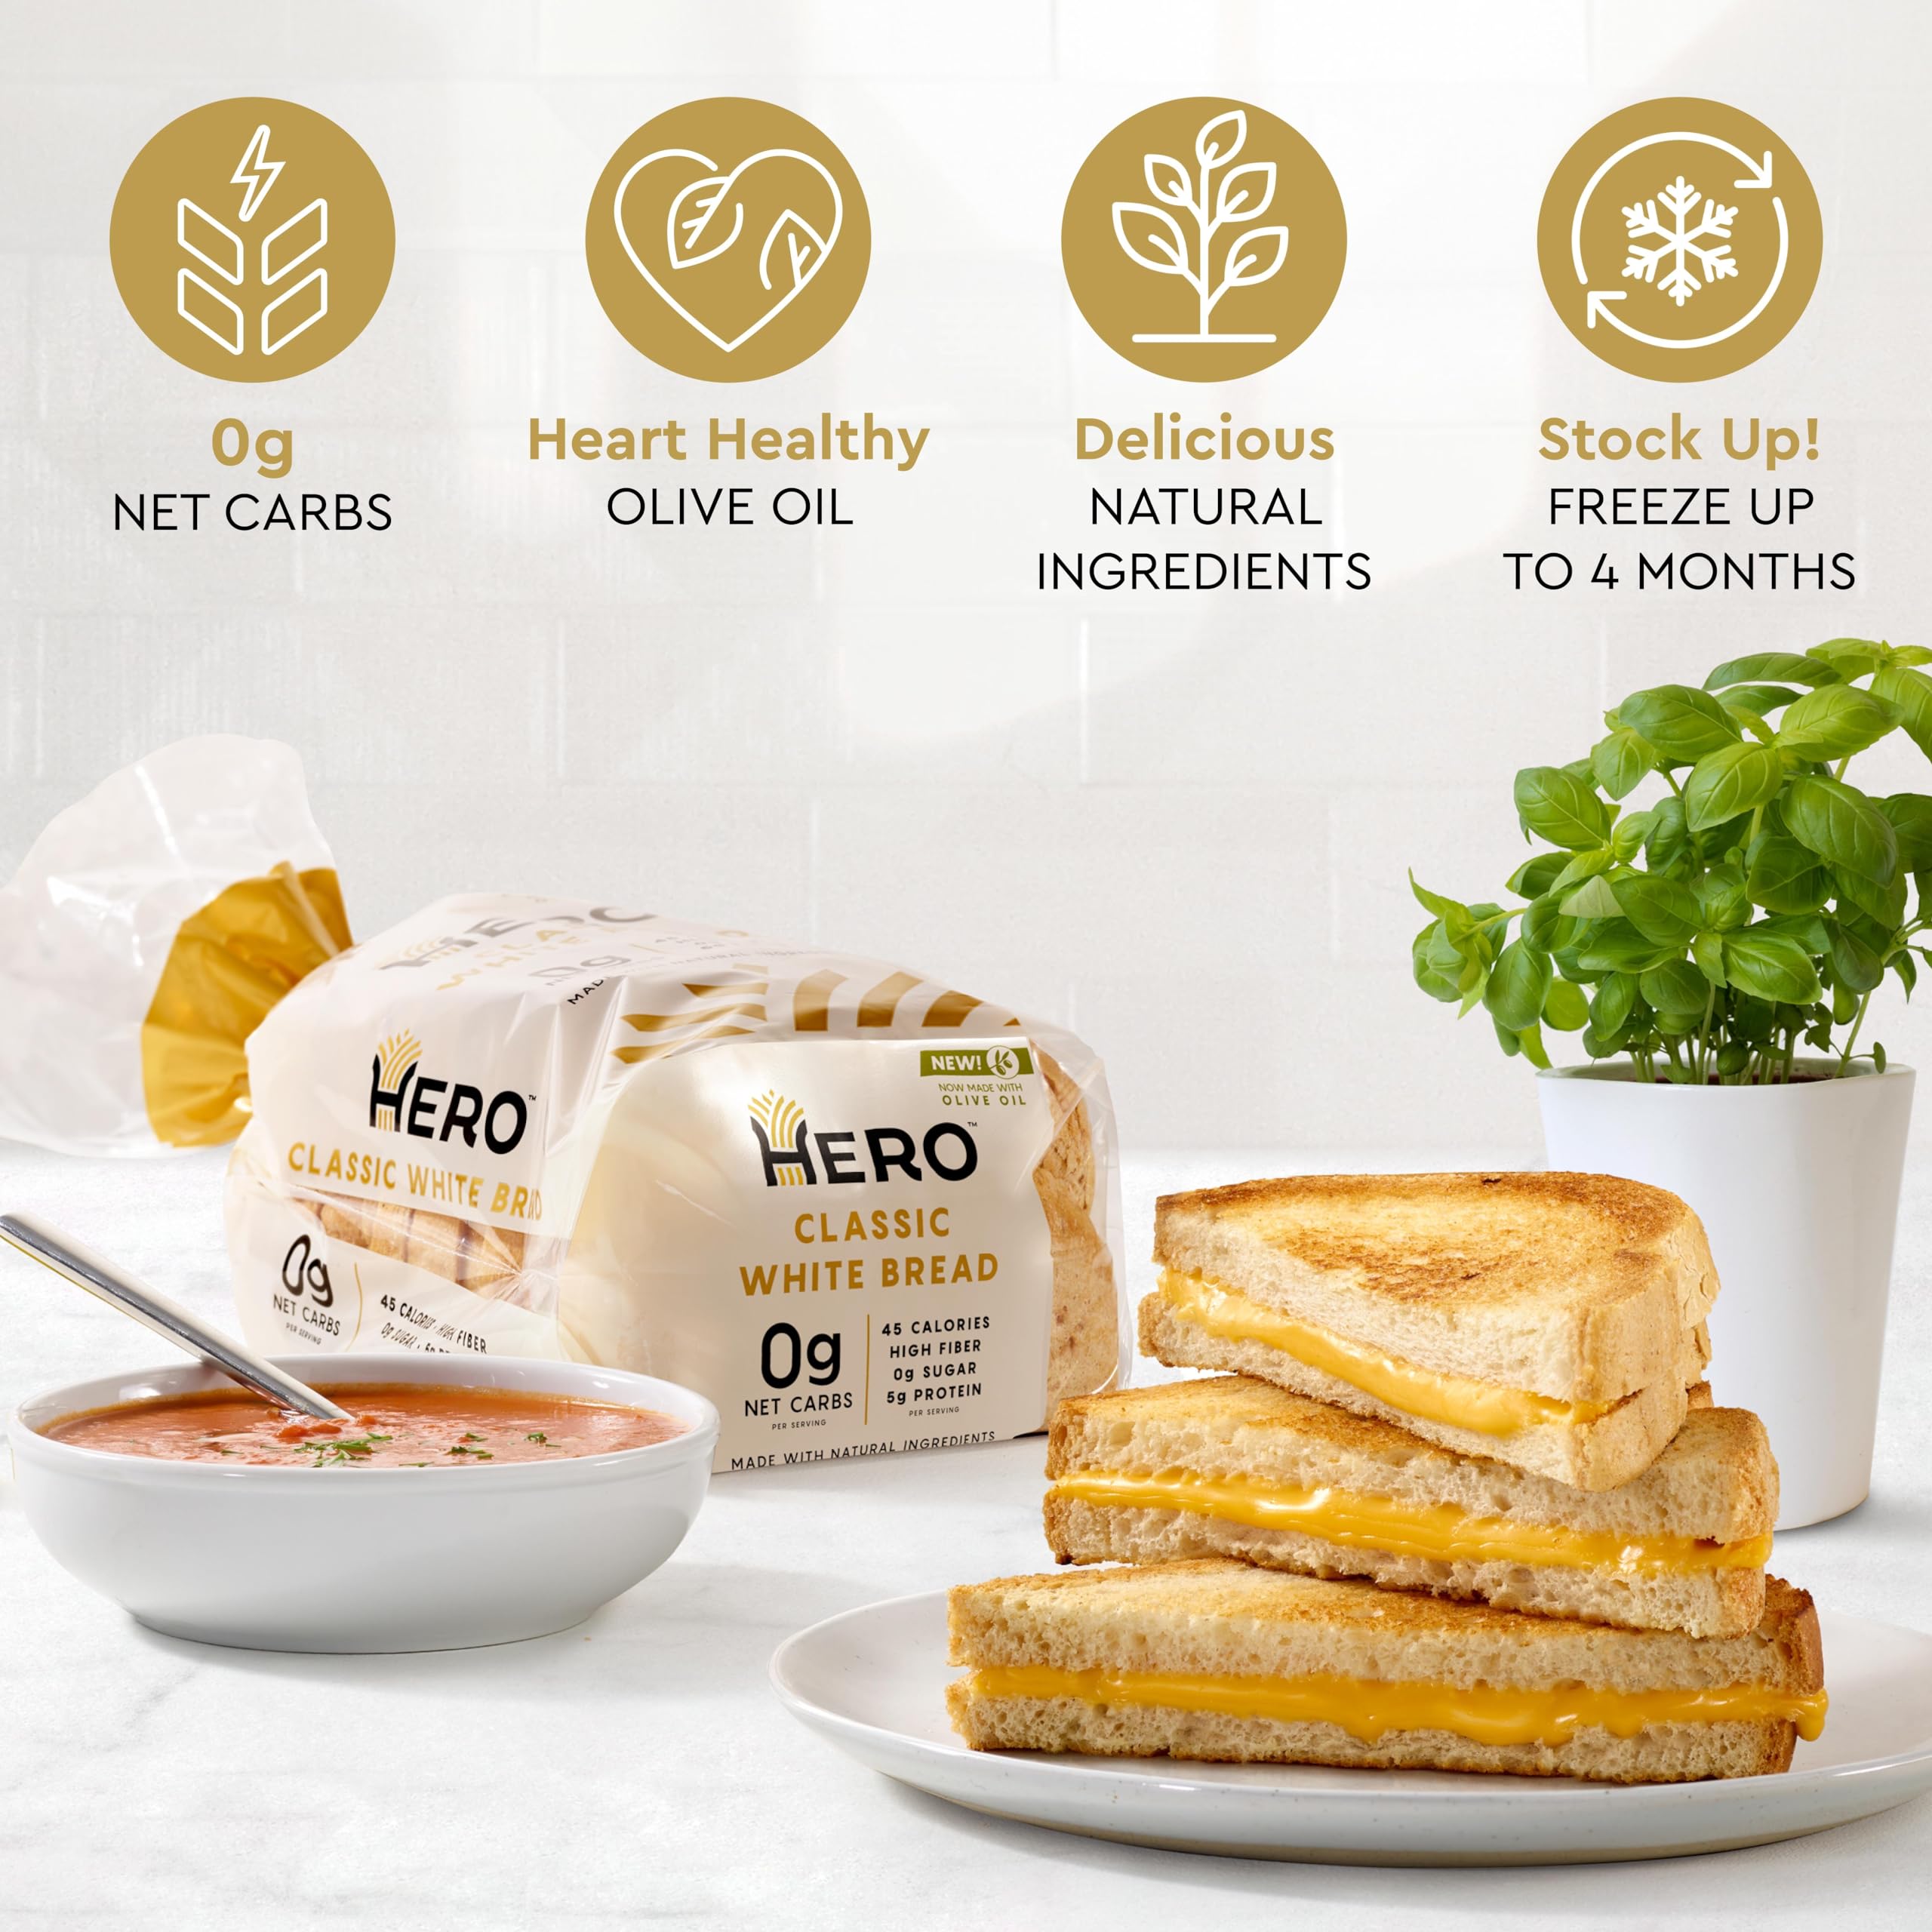 Hero Classic White Bread — Delicious Bread with 0g Net Carb, 0g Sugar, 45 Calories, 11g Fiber per Slice | Tastes Like Regular Bread | Low Carb & Keto Friendly Bread Loaf —15 Slices/Loaf, 2 Loaves